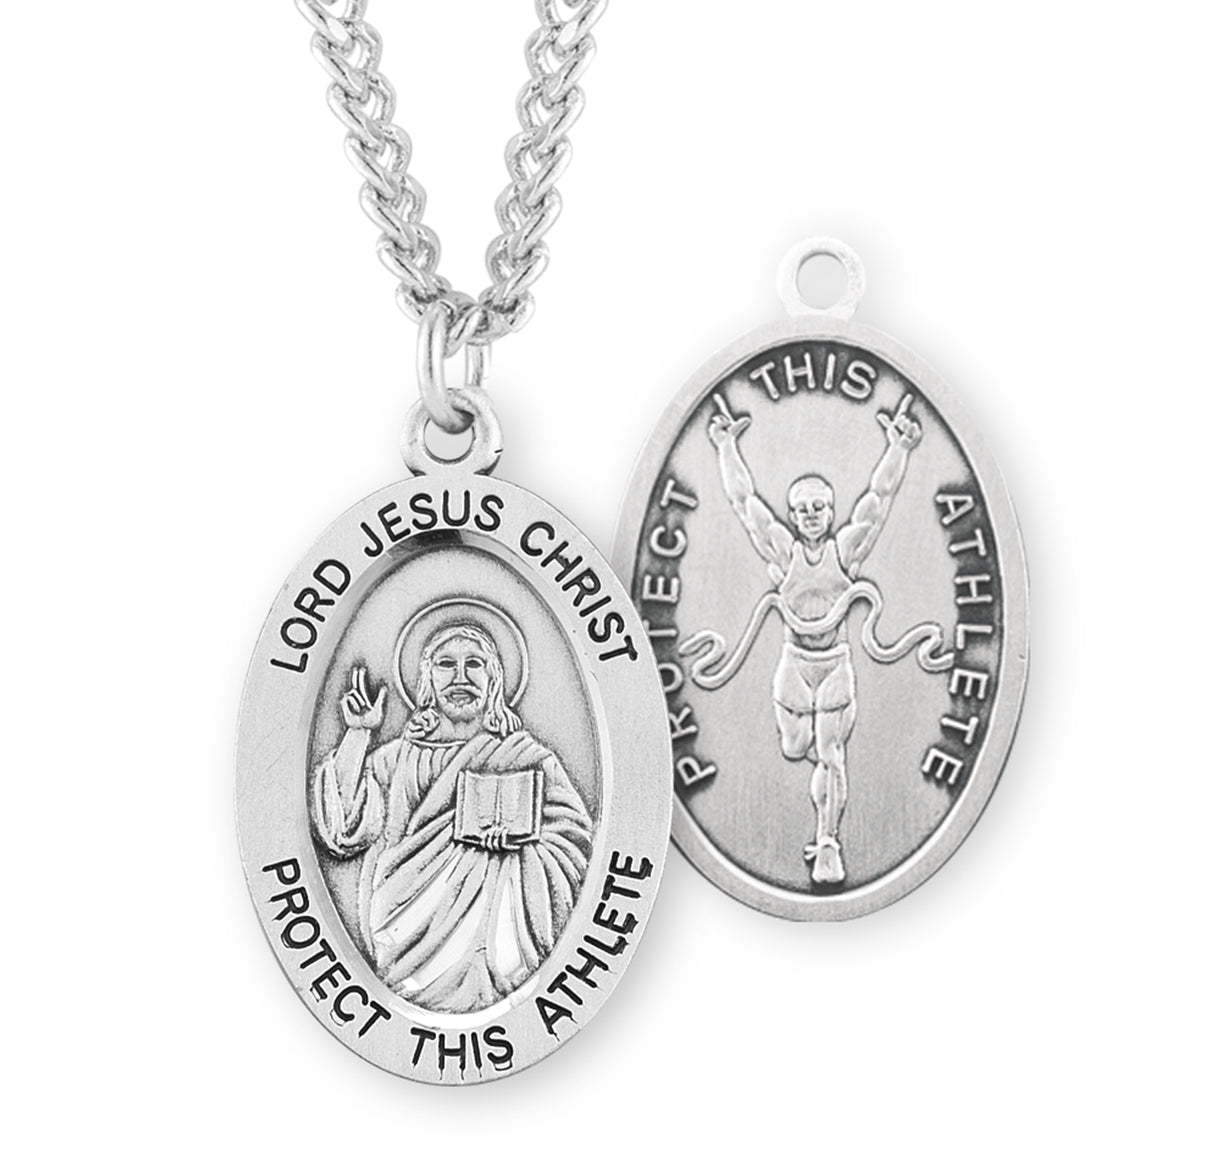 Lord Jesus Christ Oval Sterling Silver Track Male Athlete Medal